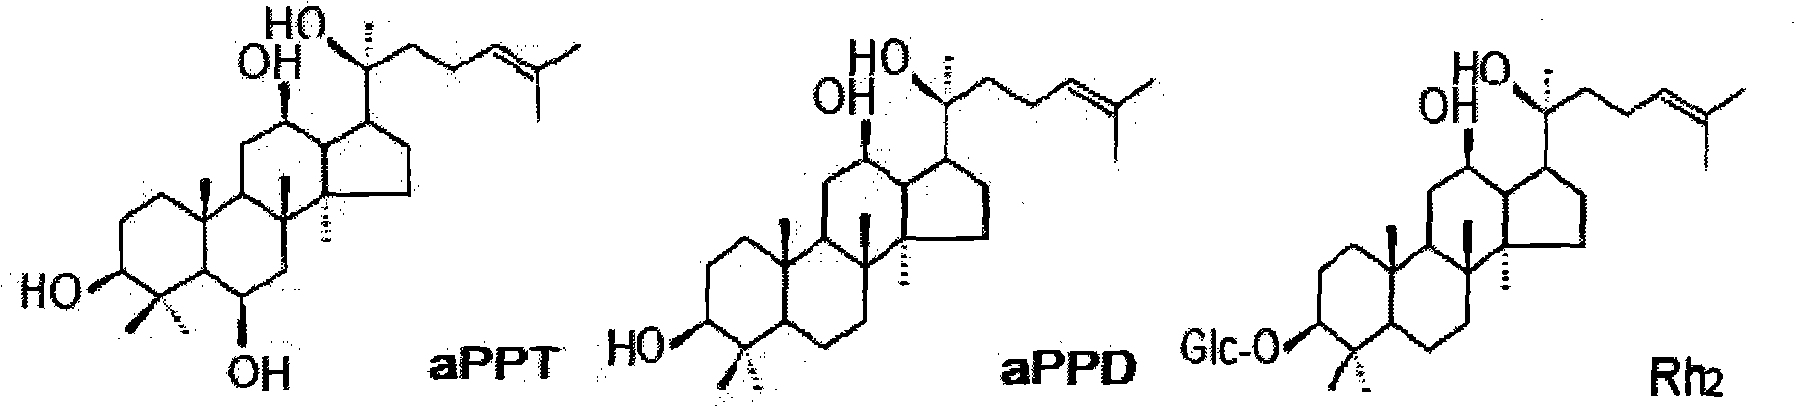 Dammarane aglycon compound and application thereof